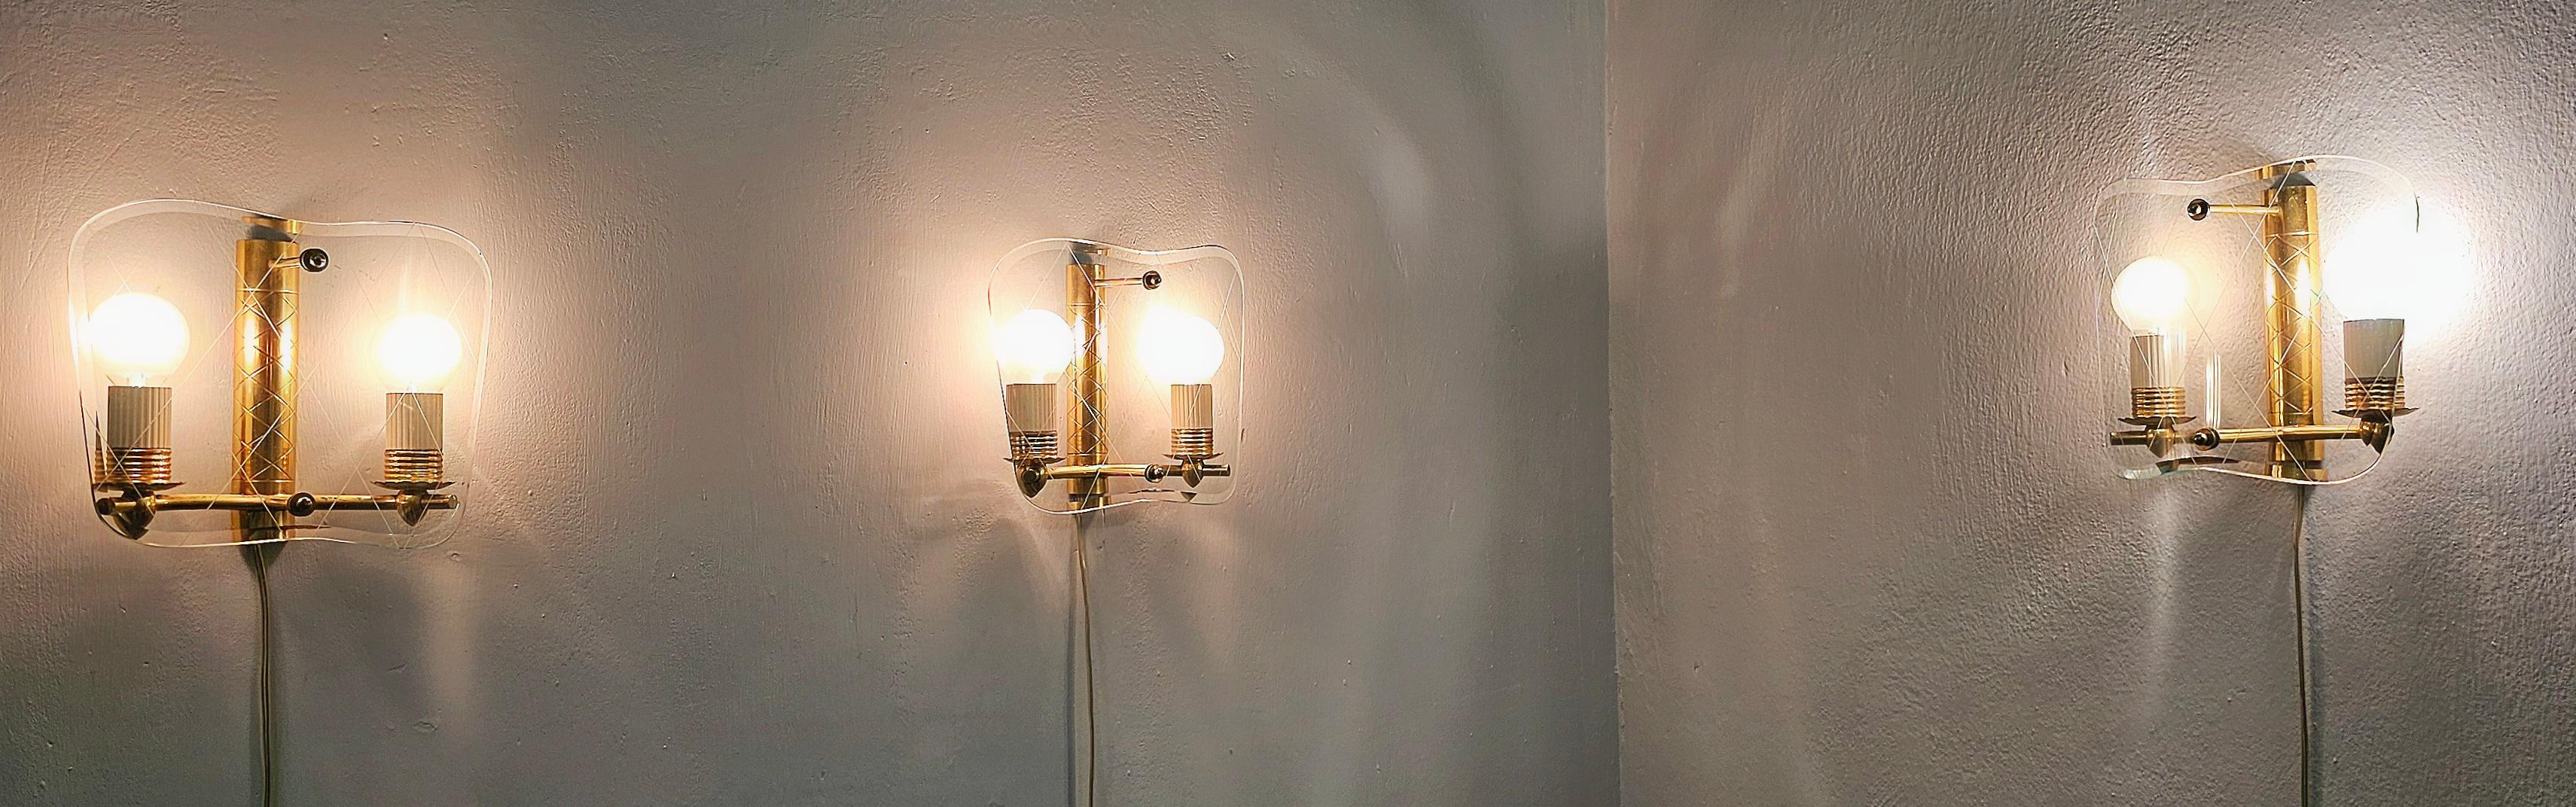 3 Wall Lights Sconces Brass Decorated Glass Midcentury Italian Design 1950 For Sale 1